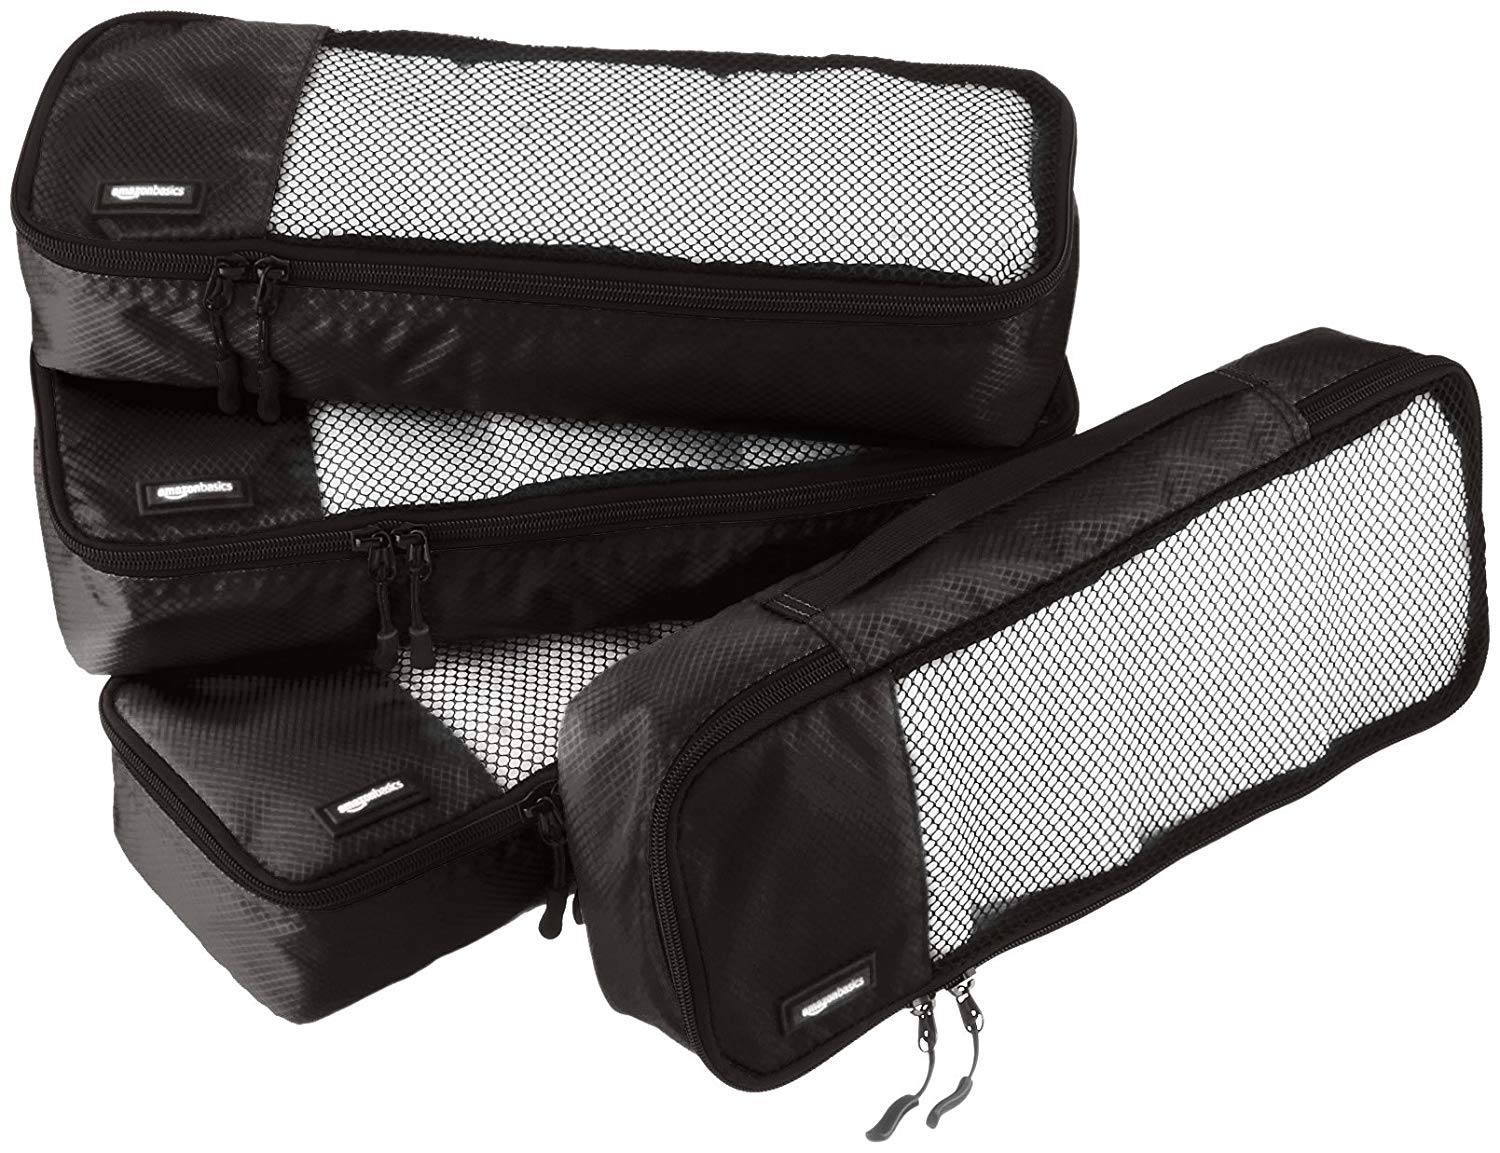 Most affordable packing cubes